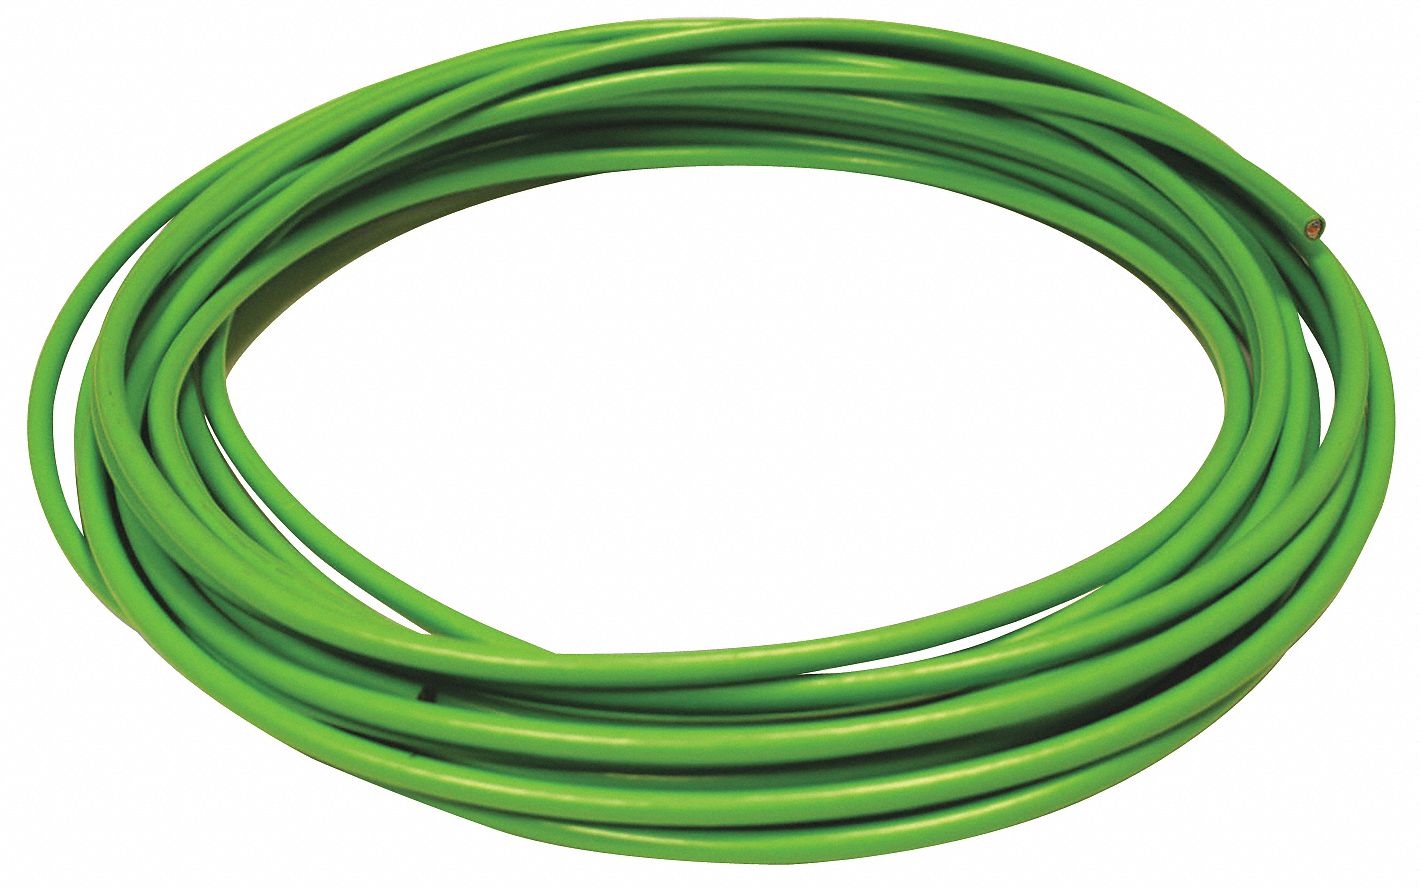 14G841 - Cable Cat 5e 22 AWG 164 ft Green